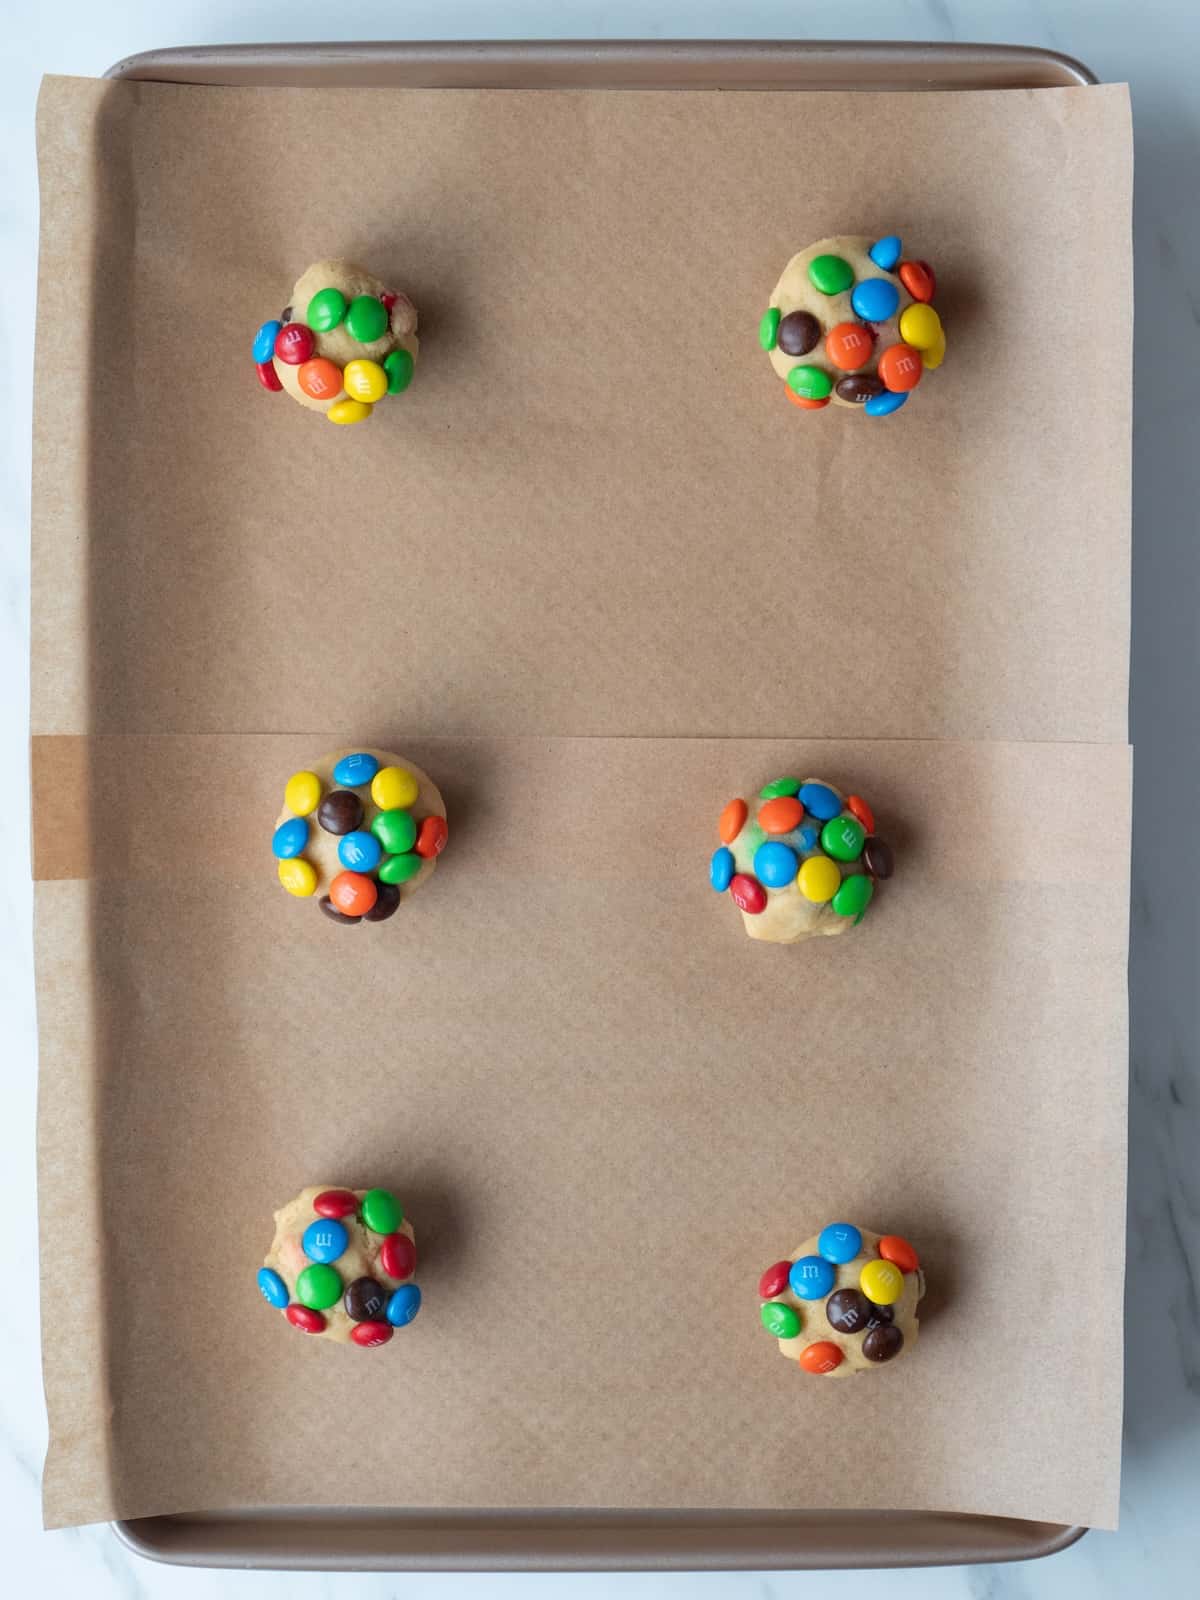 A parchment paper lined baking sheet with six golf ball sized cookie dough balls, with additional M&Ms stuck into them.